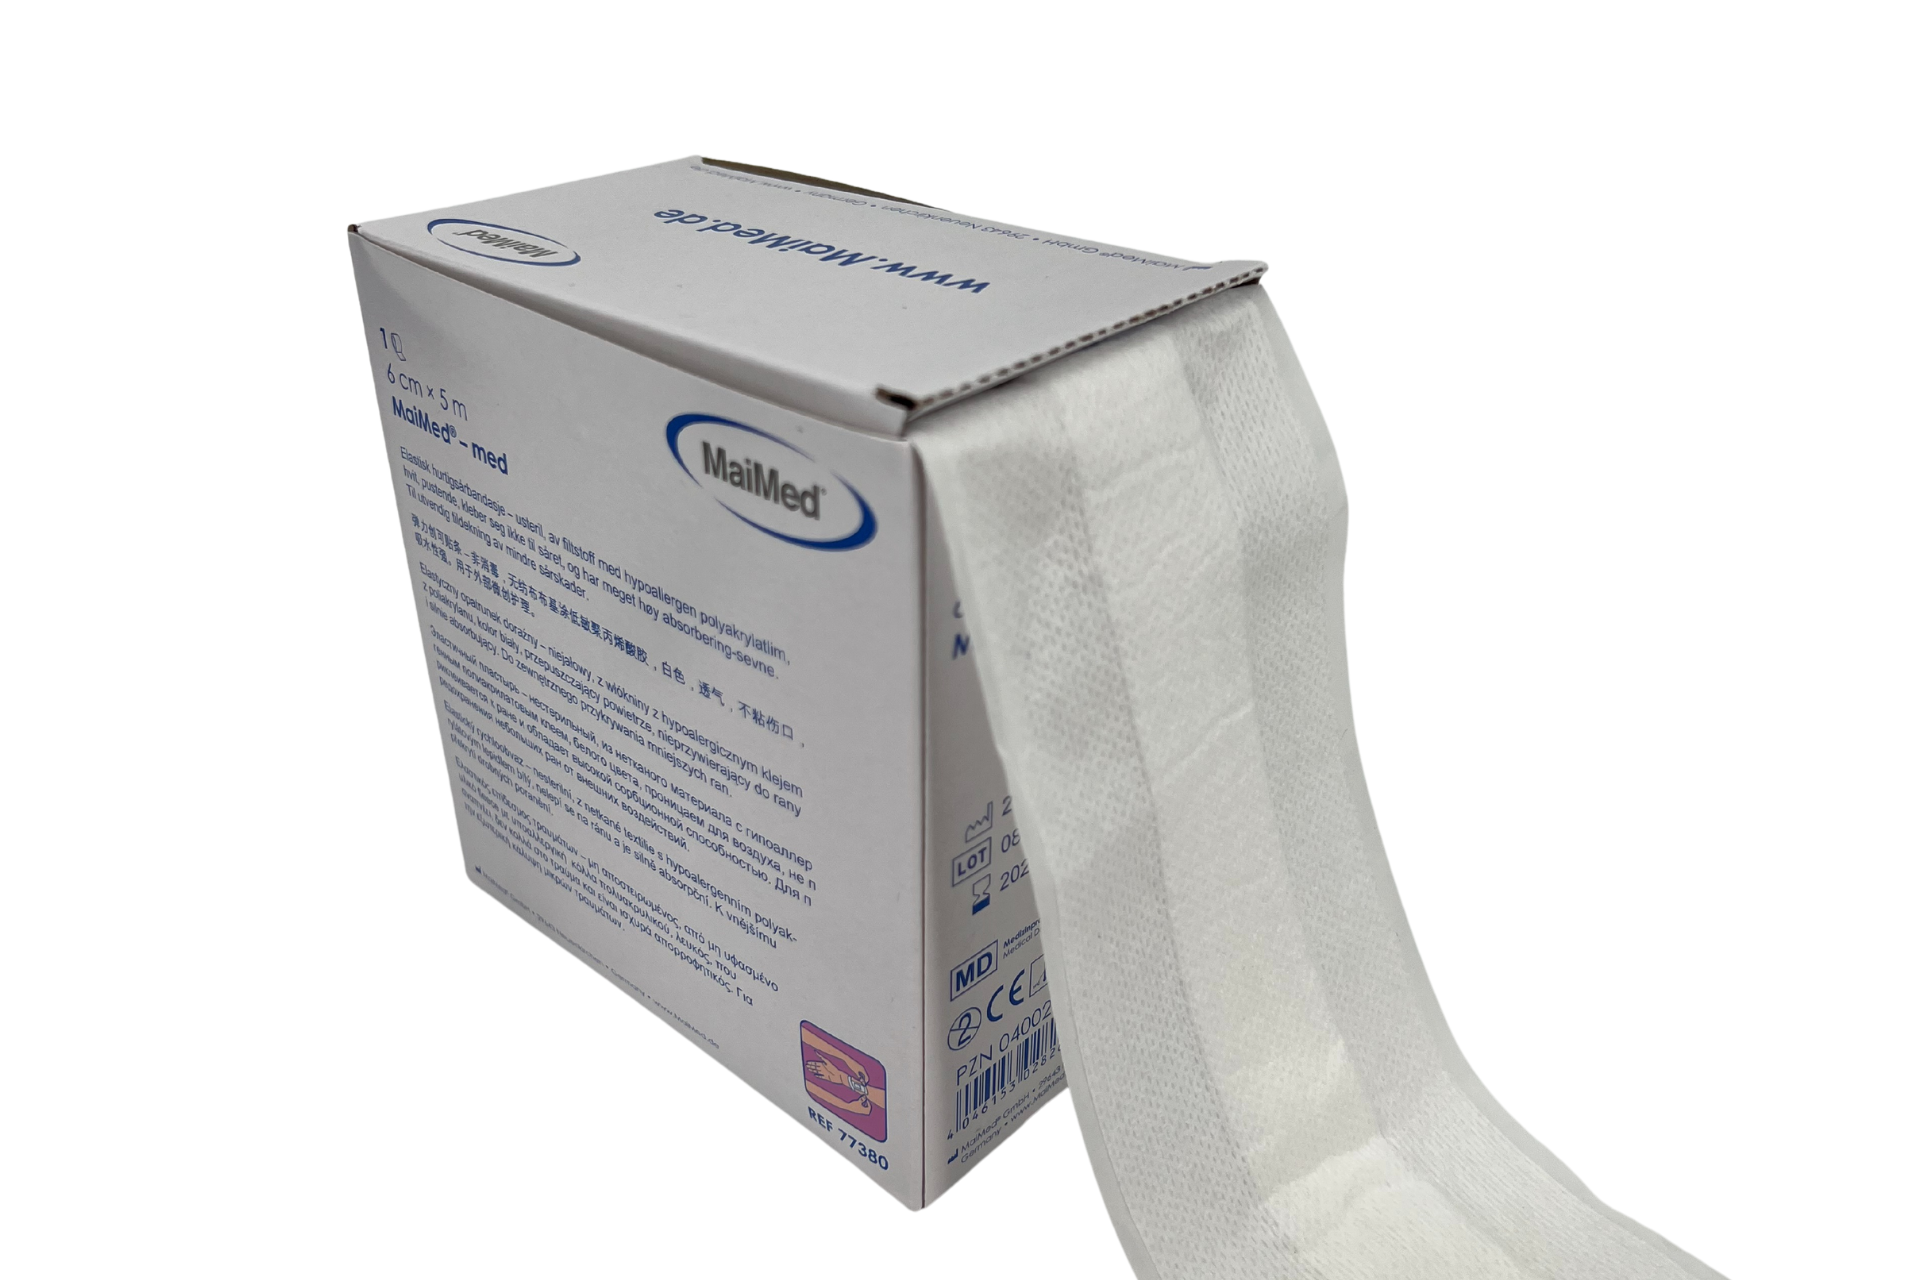 Wound dressing skin-colored or white - 0